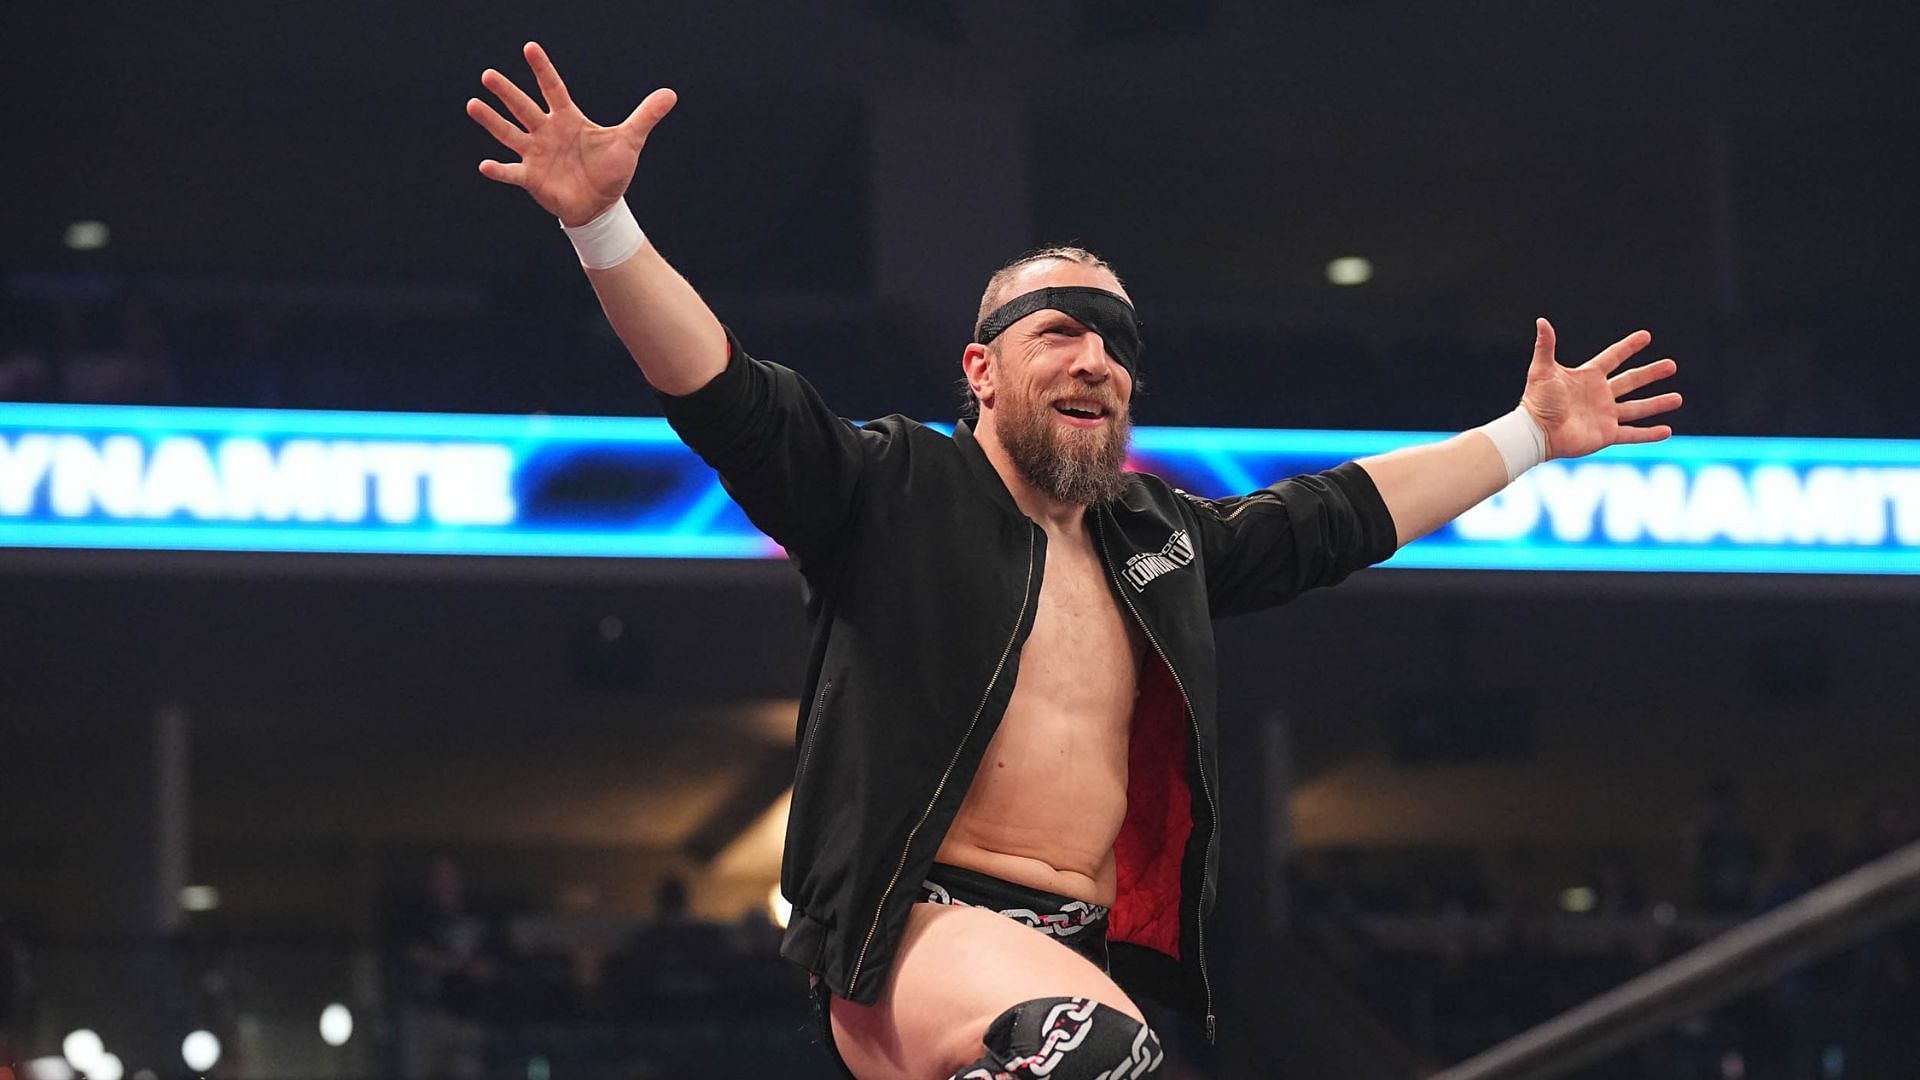 Bryan Danielson is a WWE Grand Slam Champion who is now with AEW [Photo courtesy of AEW Official Website]